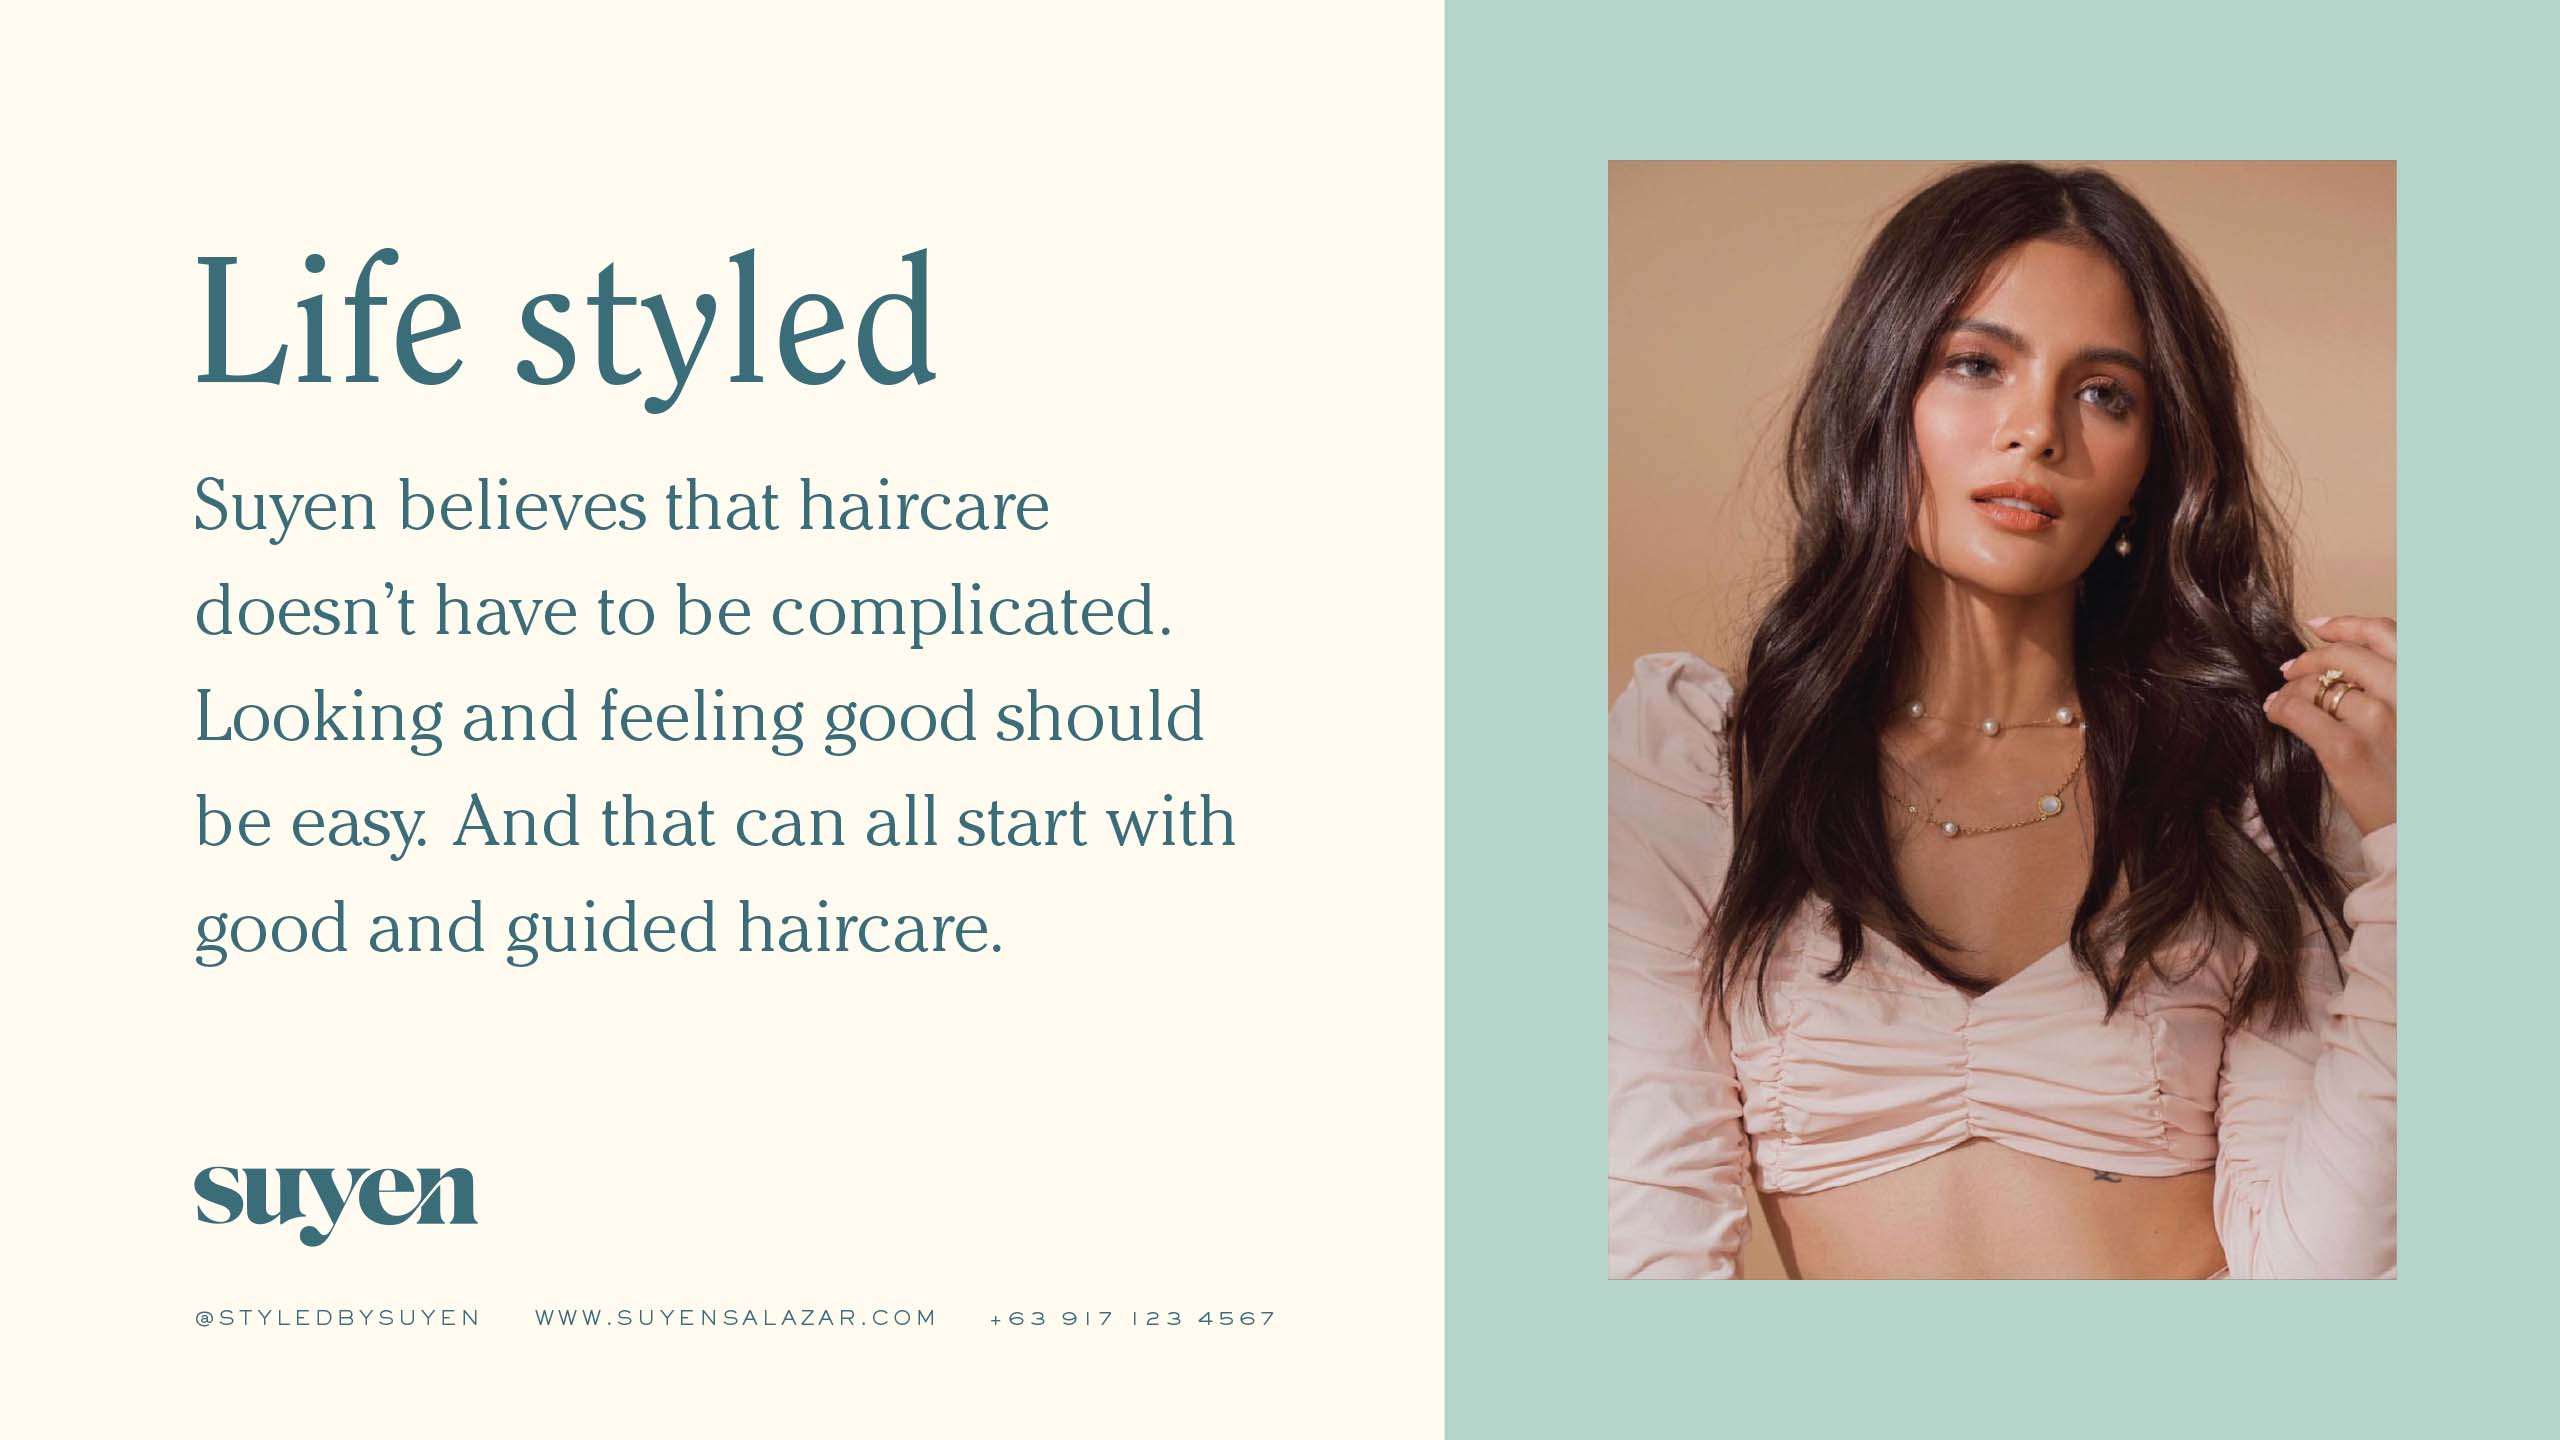 Modern and sophisticated typesetting design for hairstylist and brand Styled by Suyen